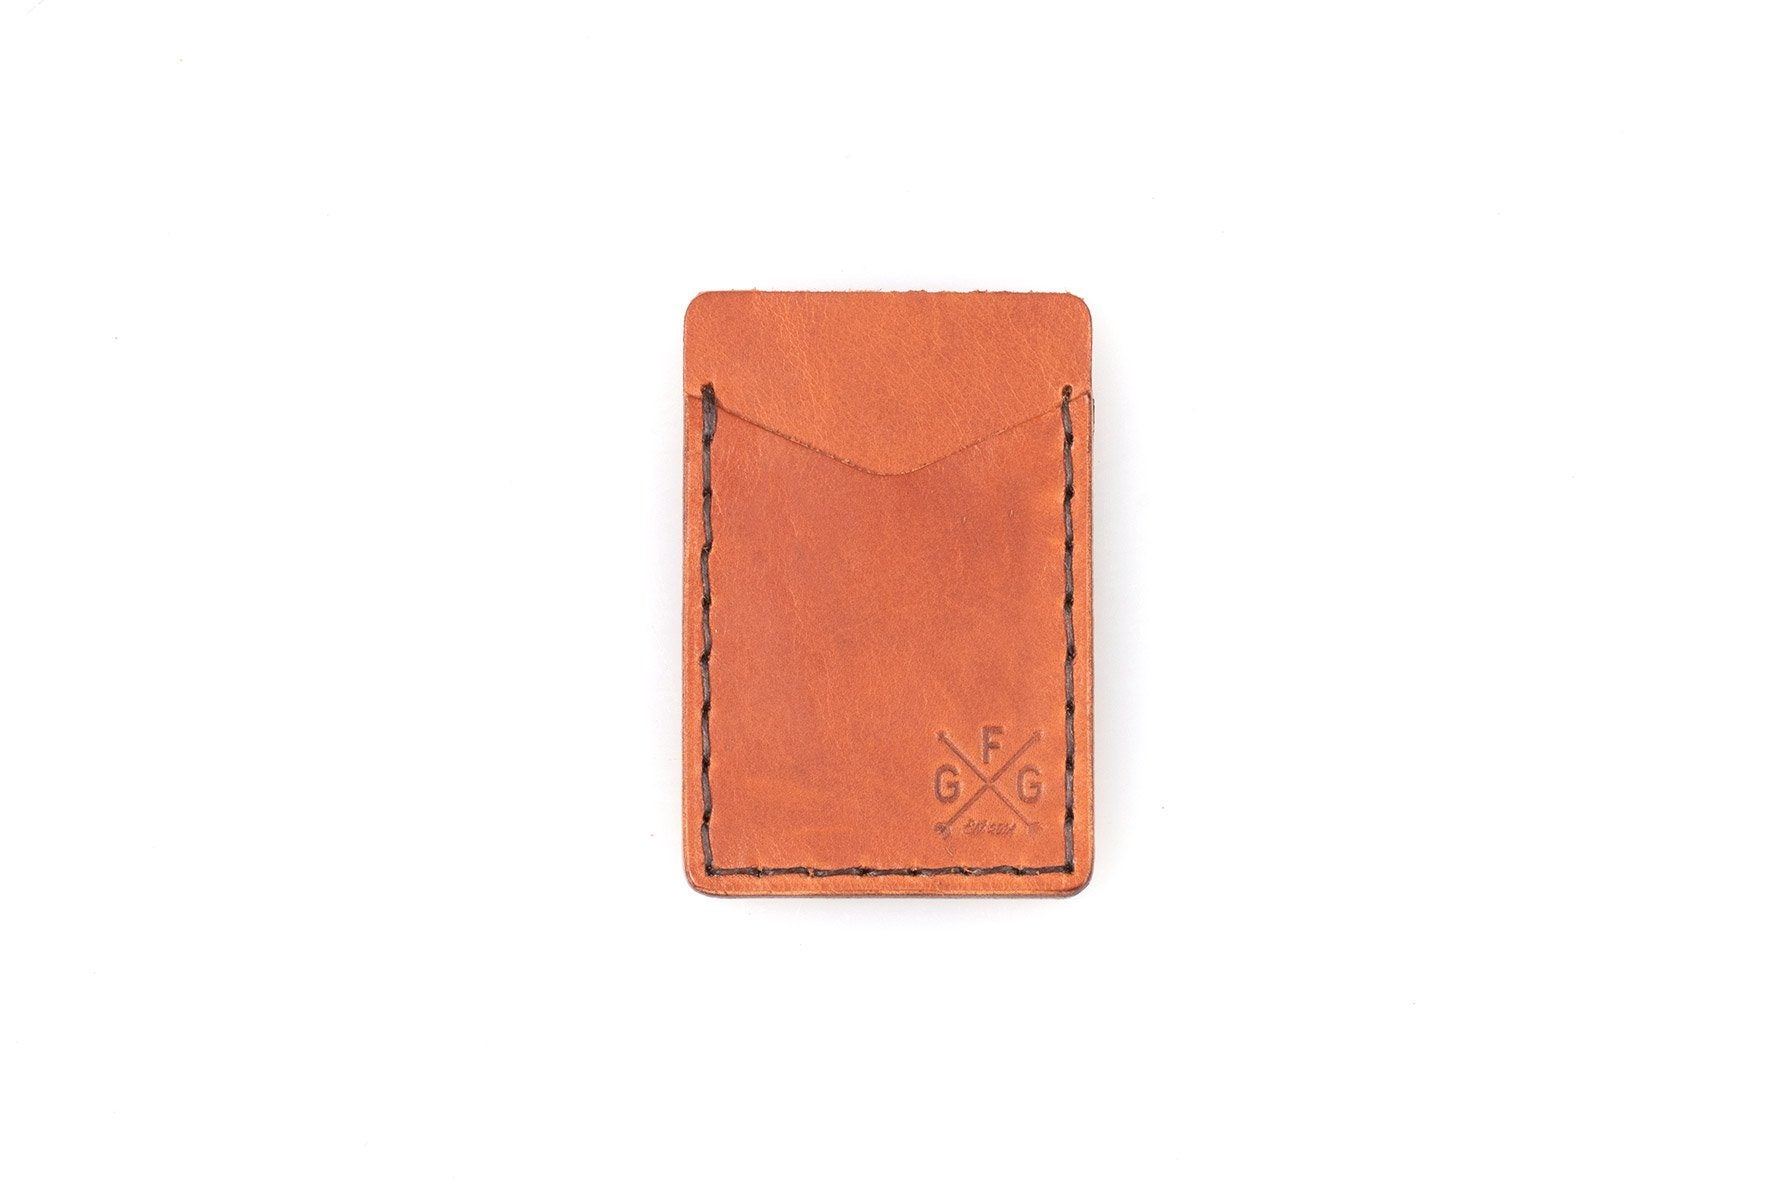 Celeste Wallet Monogram - Wallets and Small Leather Goods